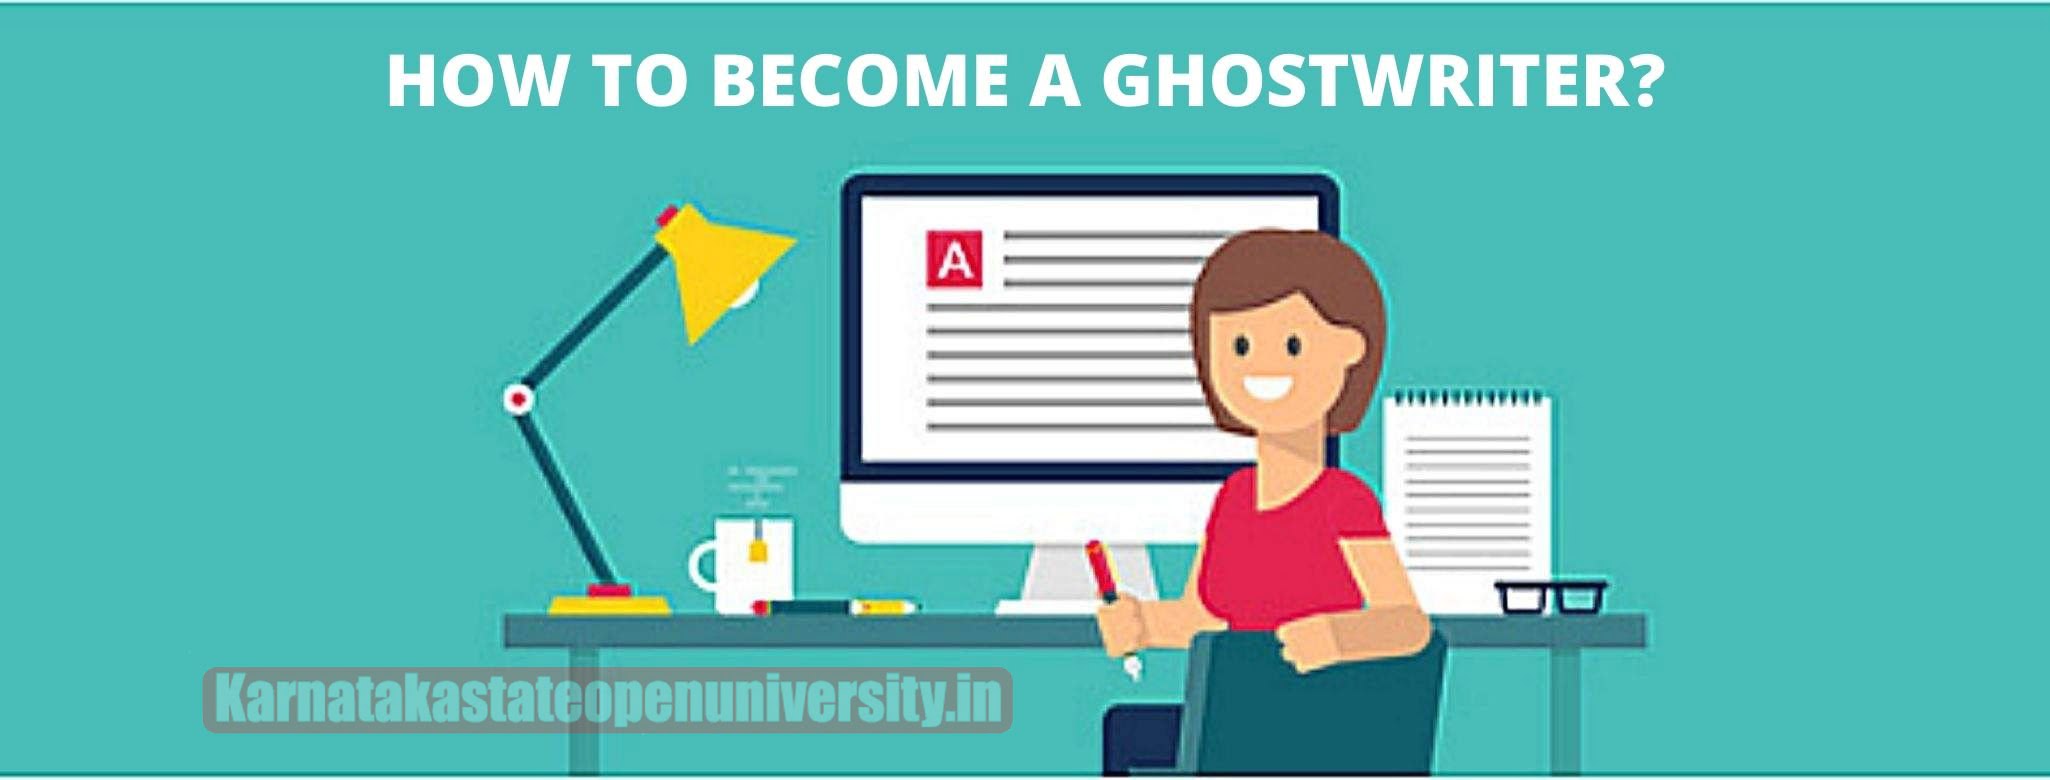 How to Become a Ghostwriter?